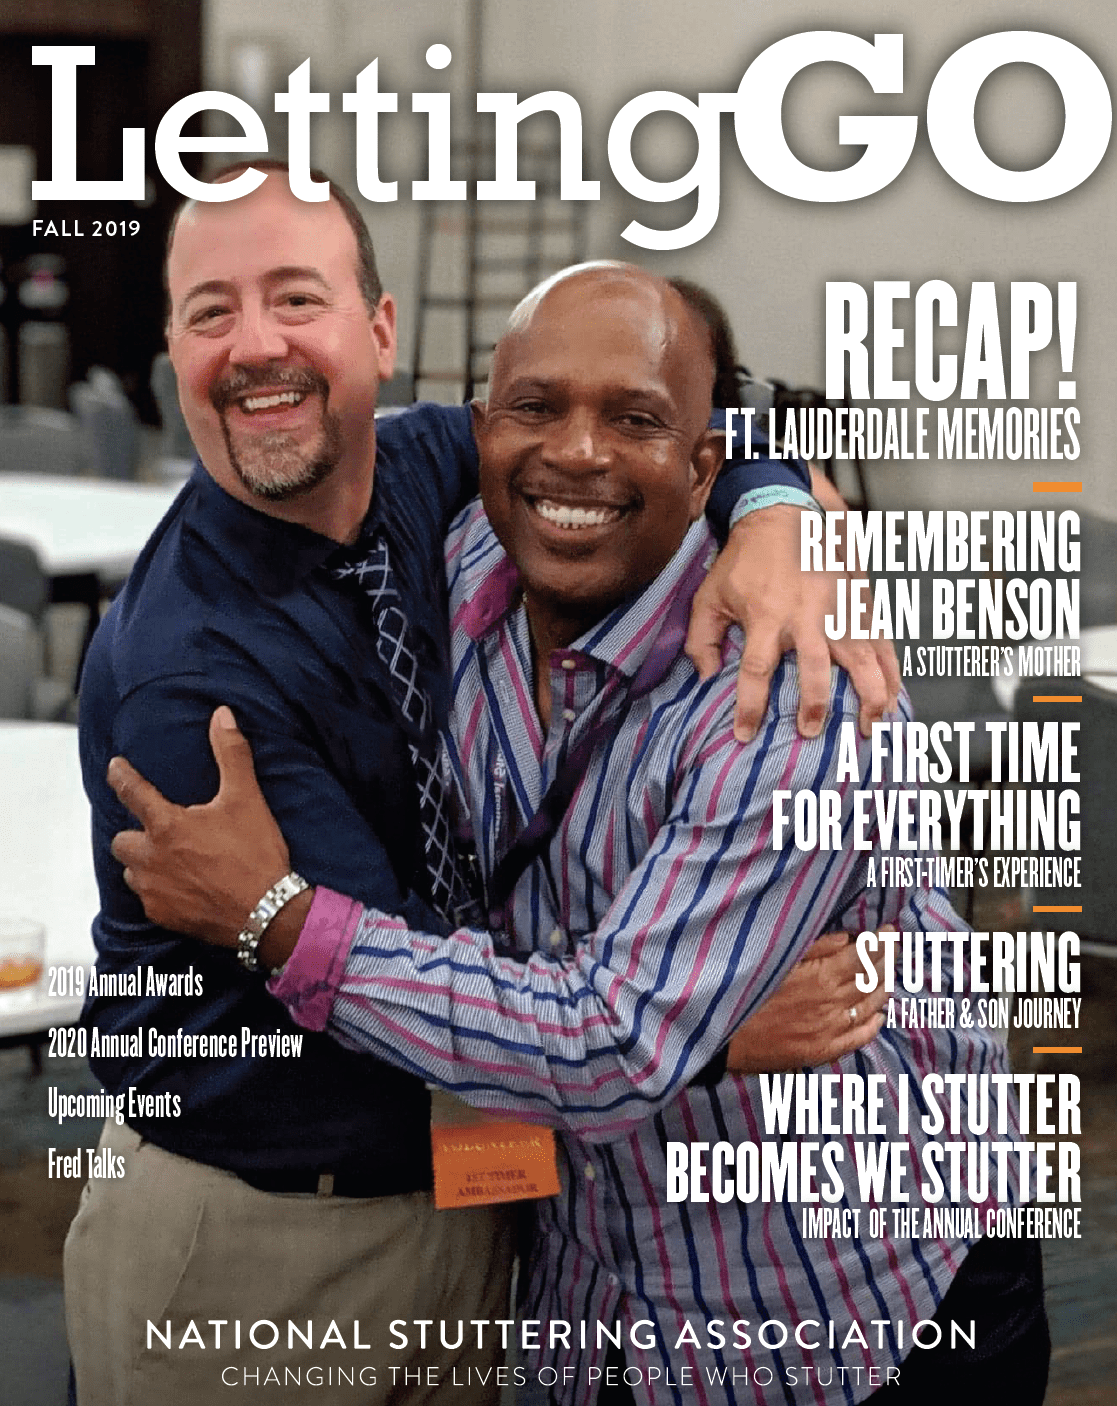 Cover of "letting go" magazine, fall 2019 issue, featuring two smiling men embracing joyfully. headlines about recaps, experiences, and the impact of stuttering. text includes details on articles and the national stuttering association.